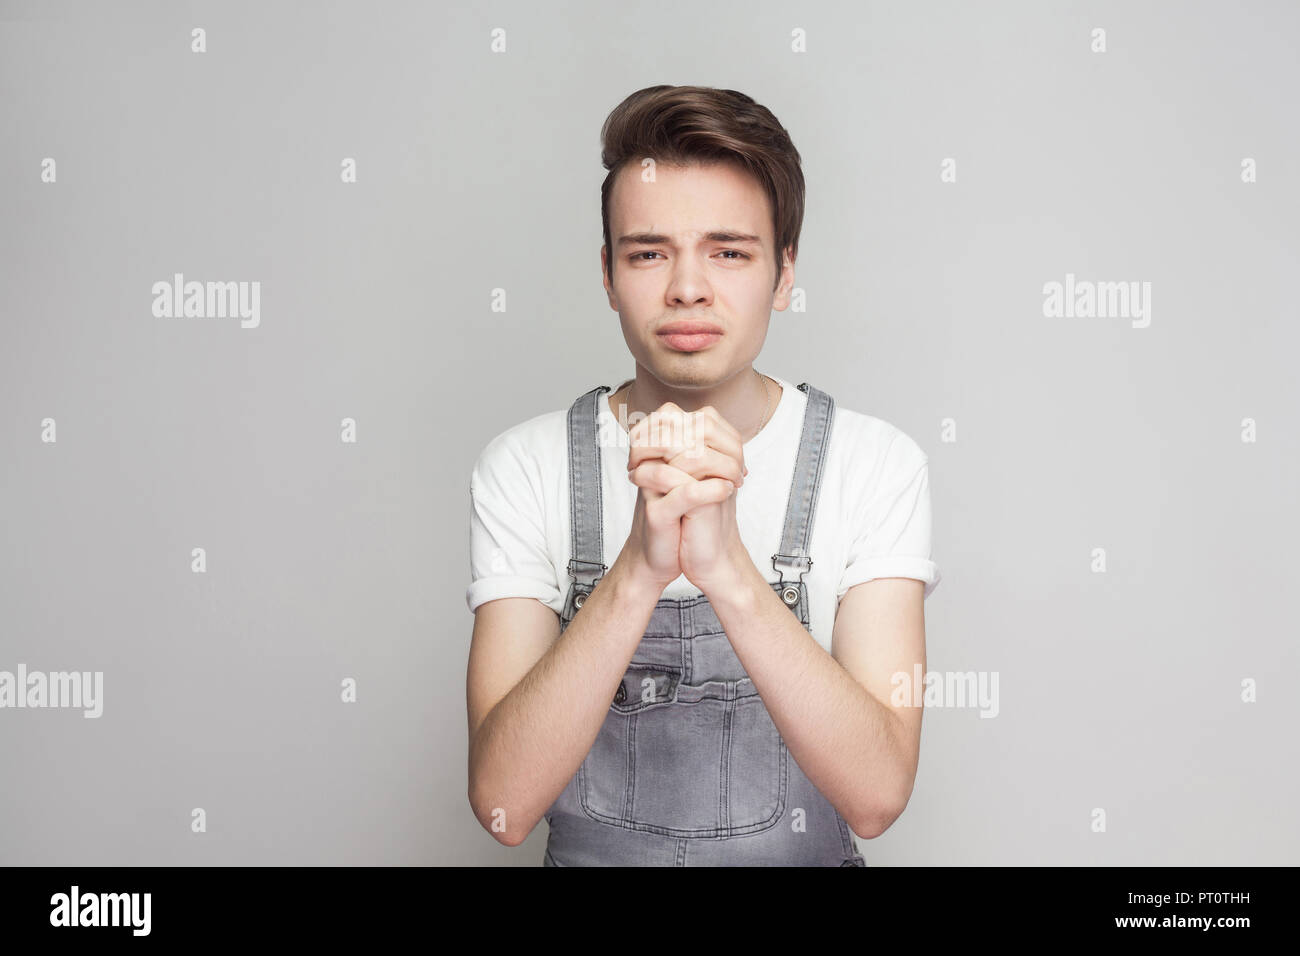 Portrait of worry hopeful young brunette man in casual style with denim overalls standing and looking at camera with pleading or forgiveness gesture.  Stock Photo